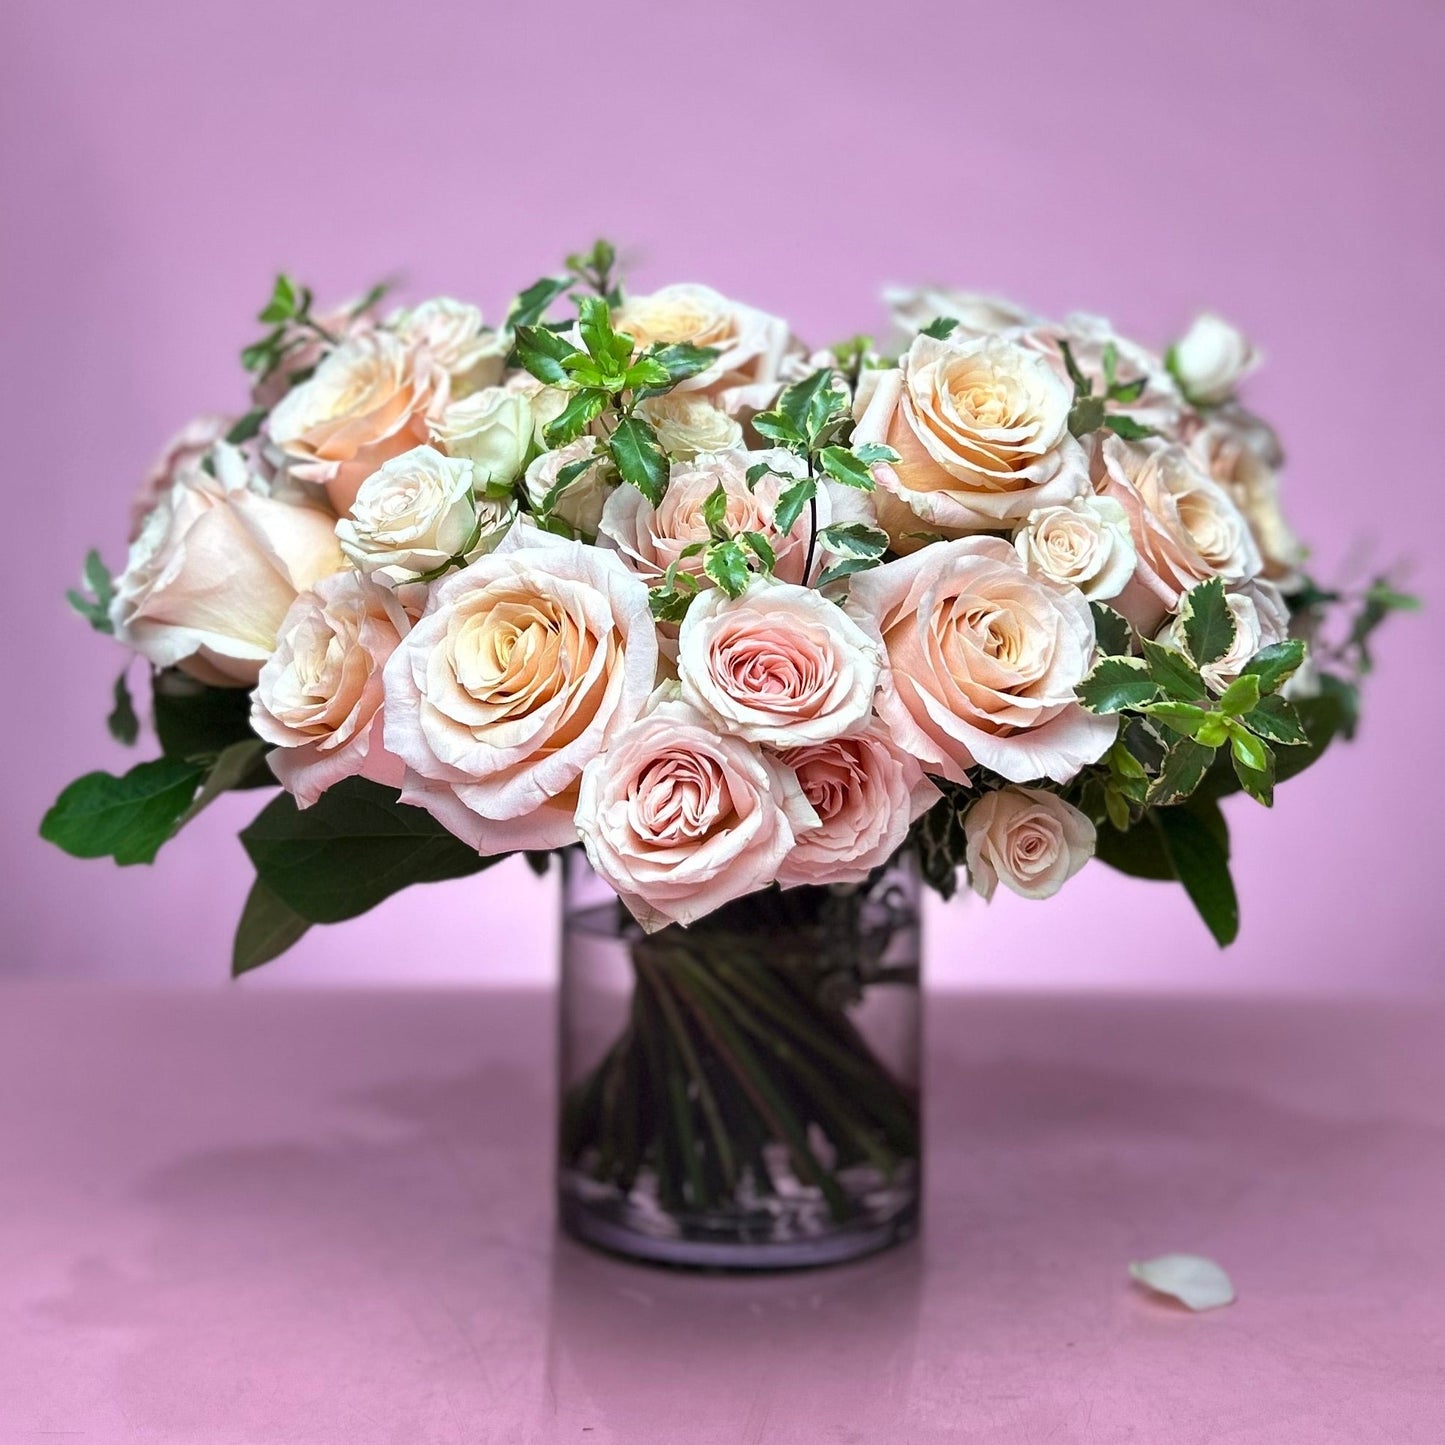 Rose Surprise (Free same day or next day nationwide delivery)